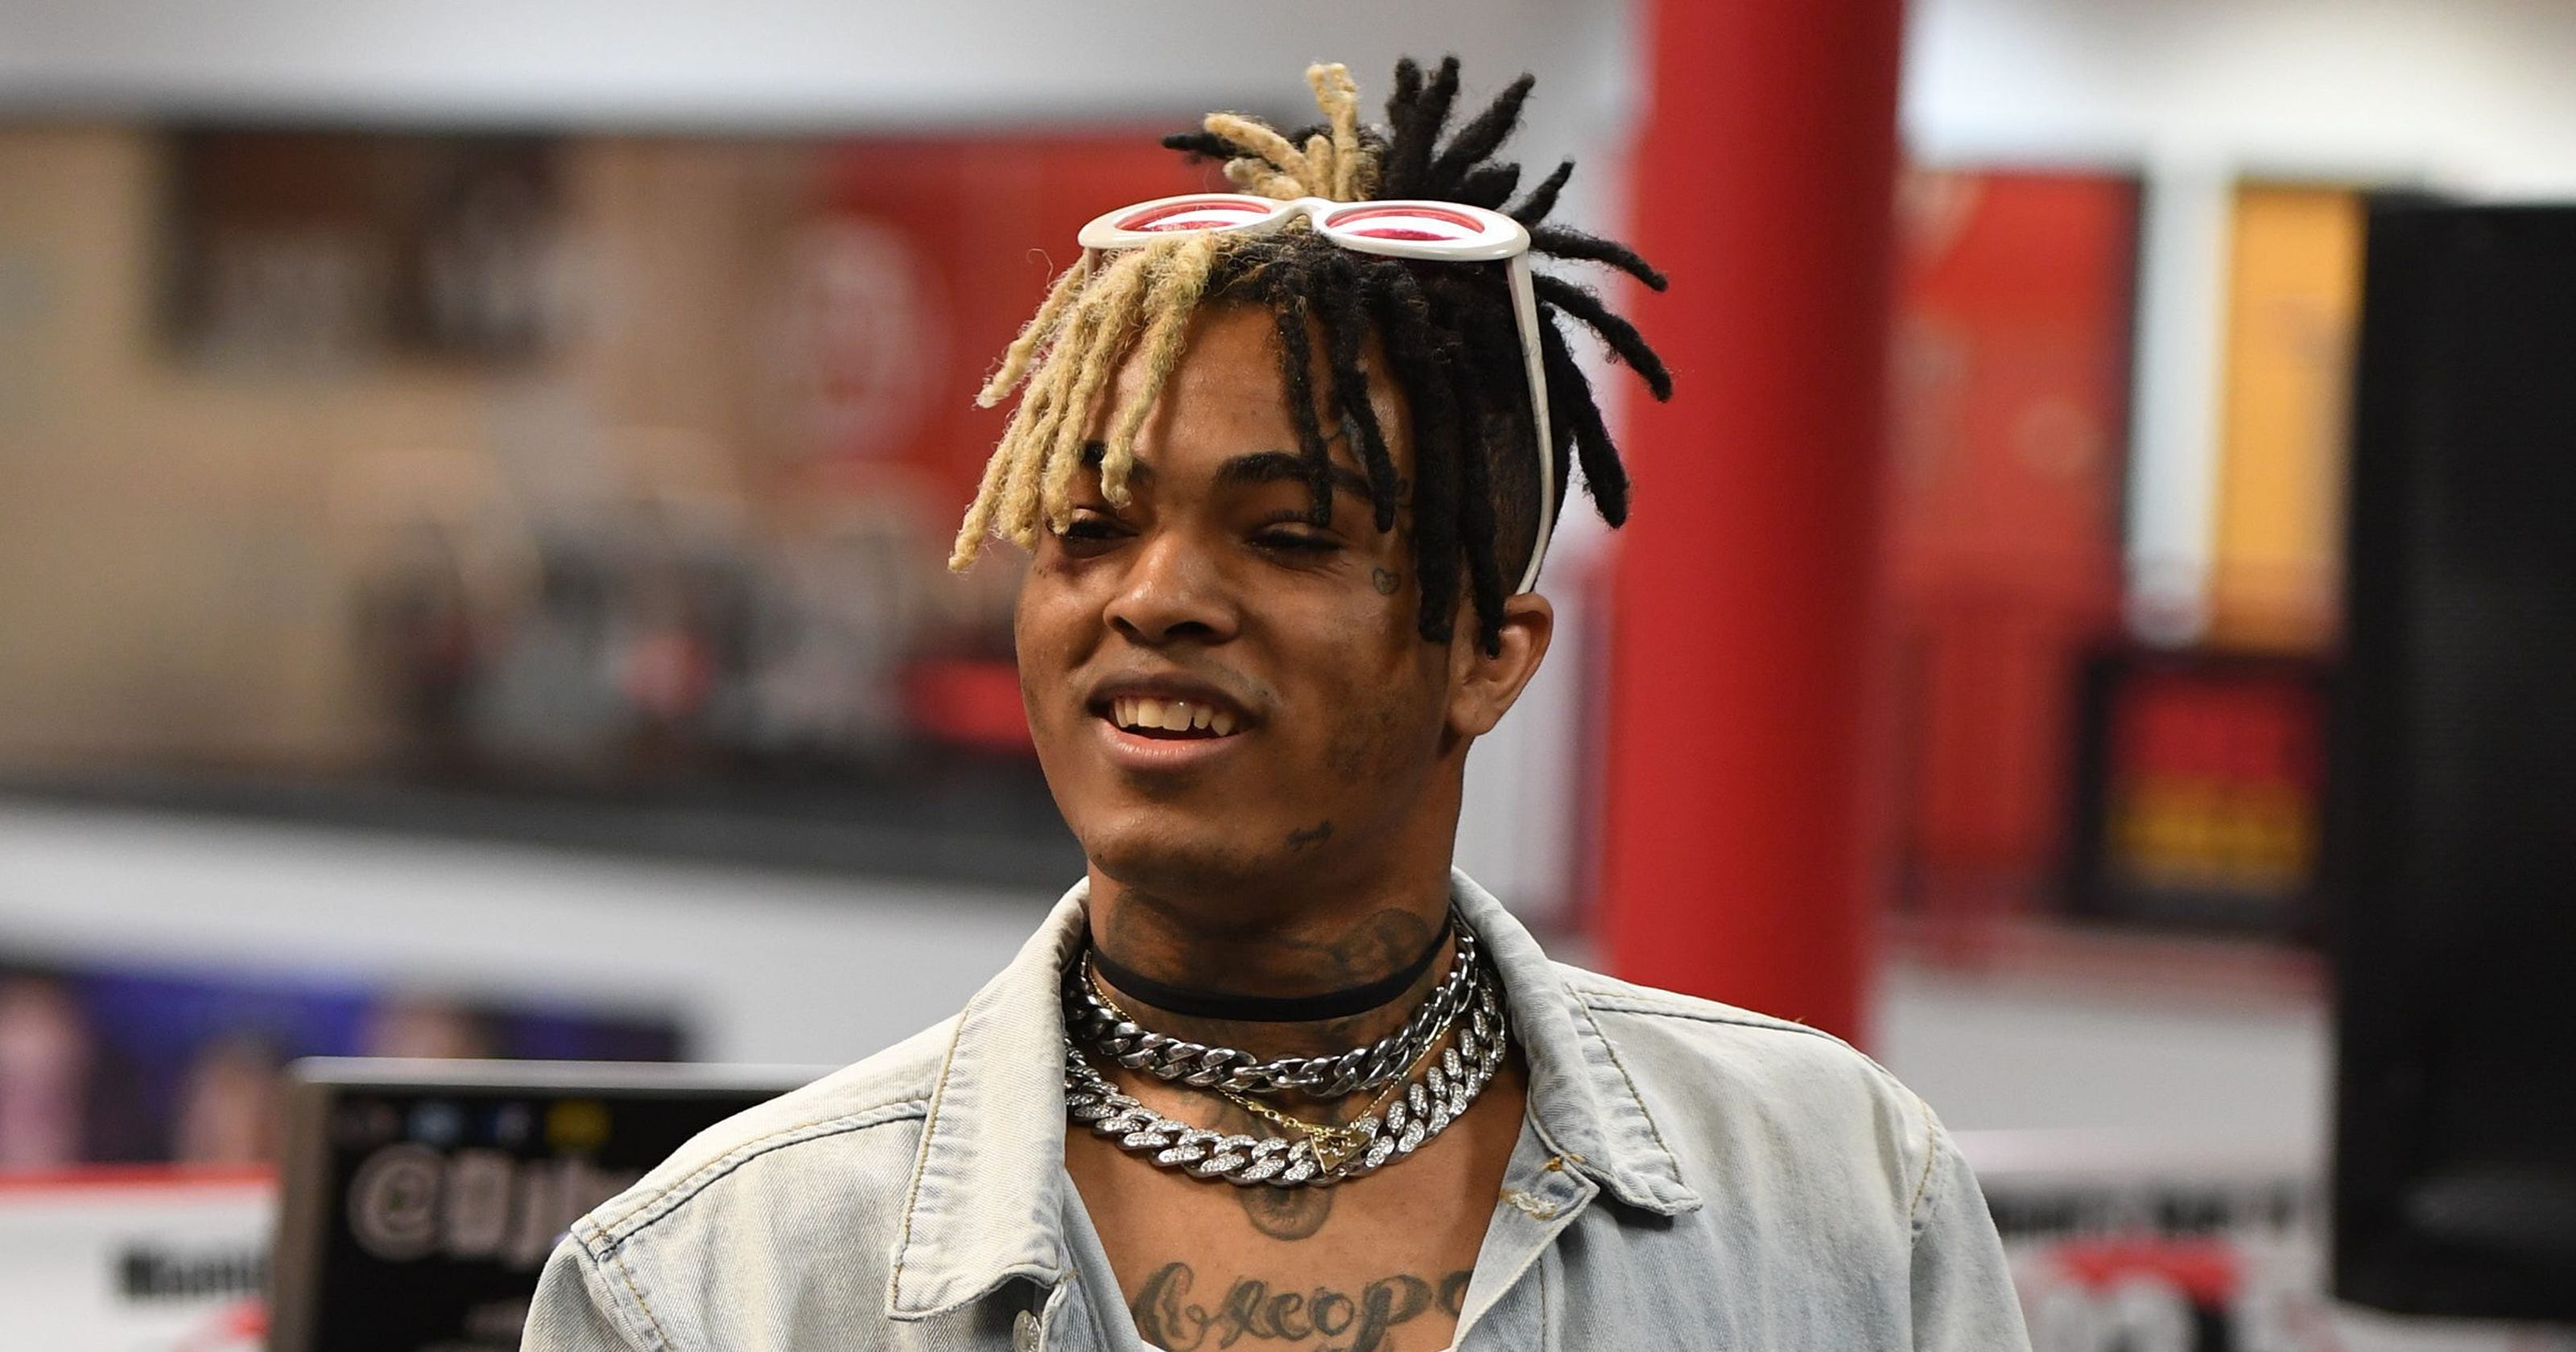 XXXTentacion dead 20yearold rapper shot and killed in South Florida